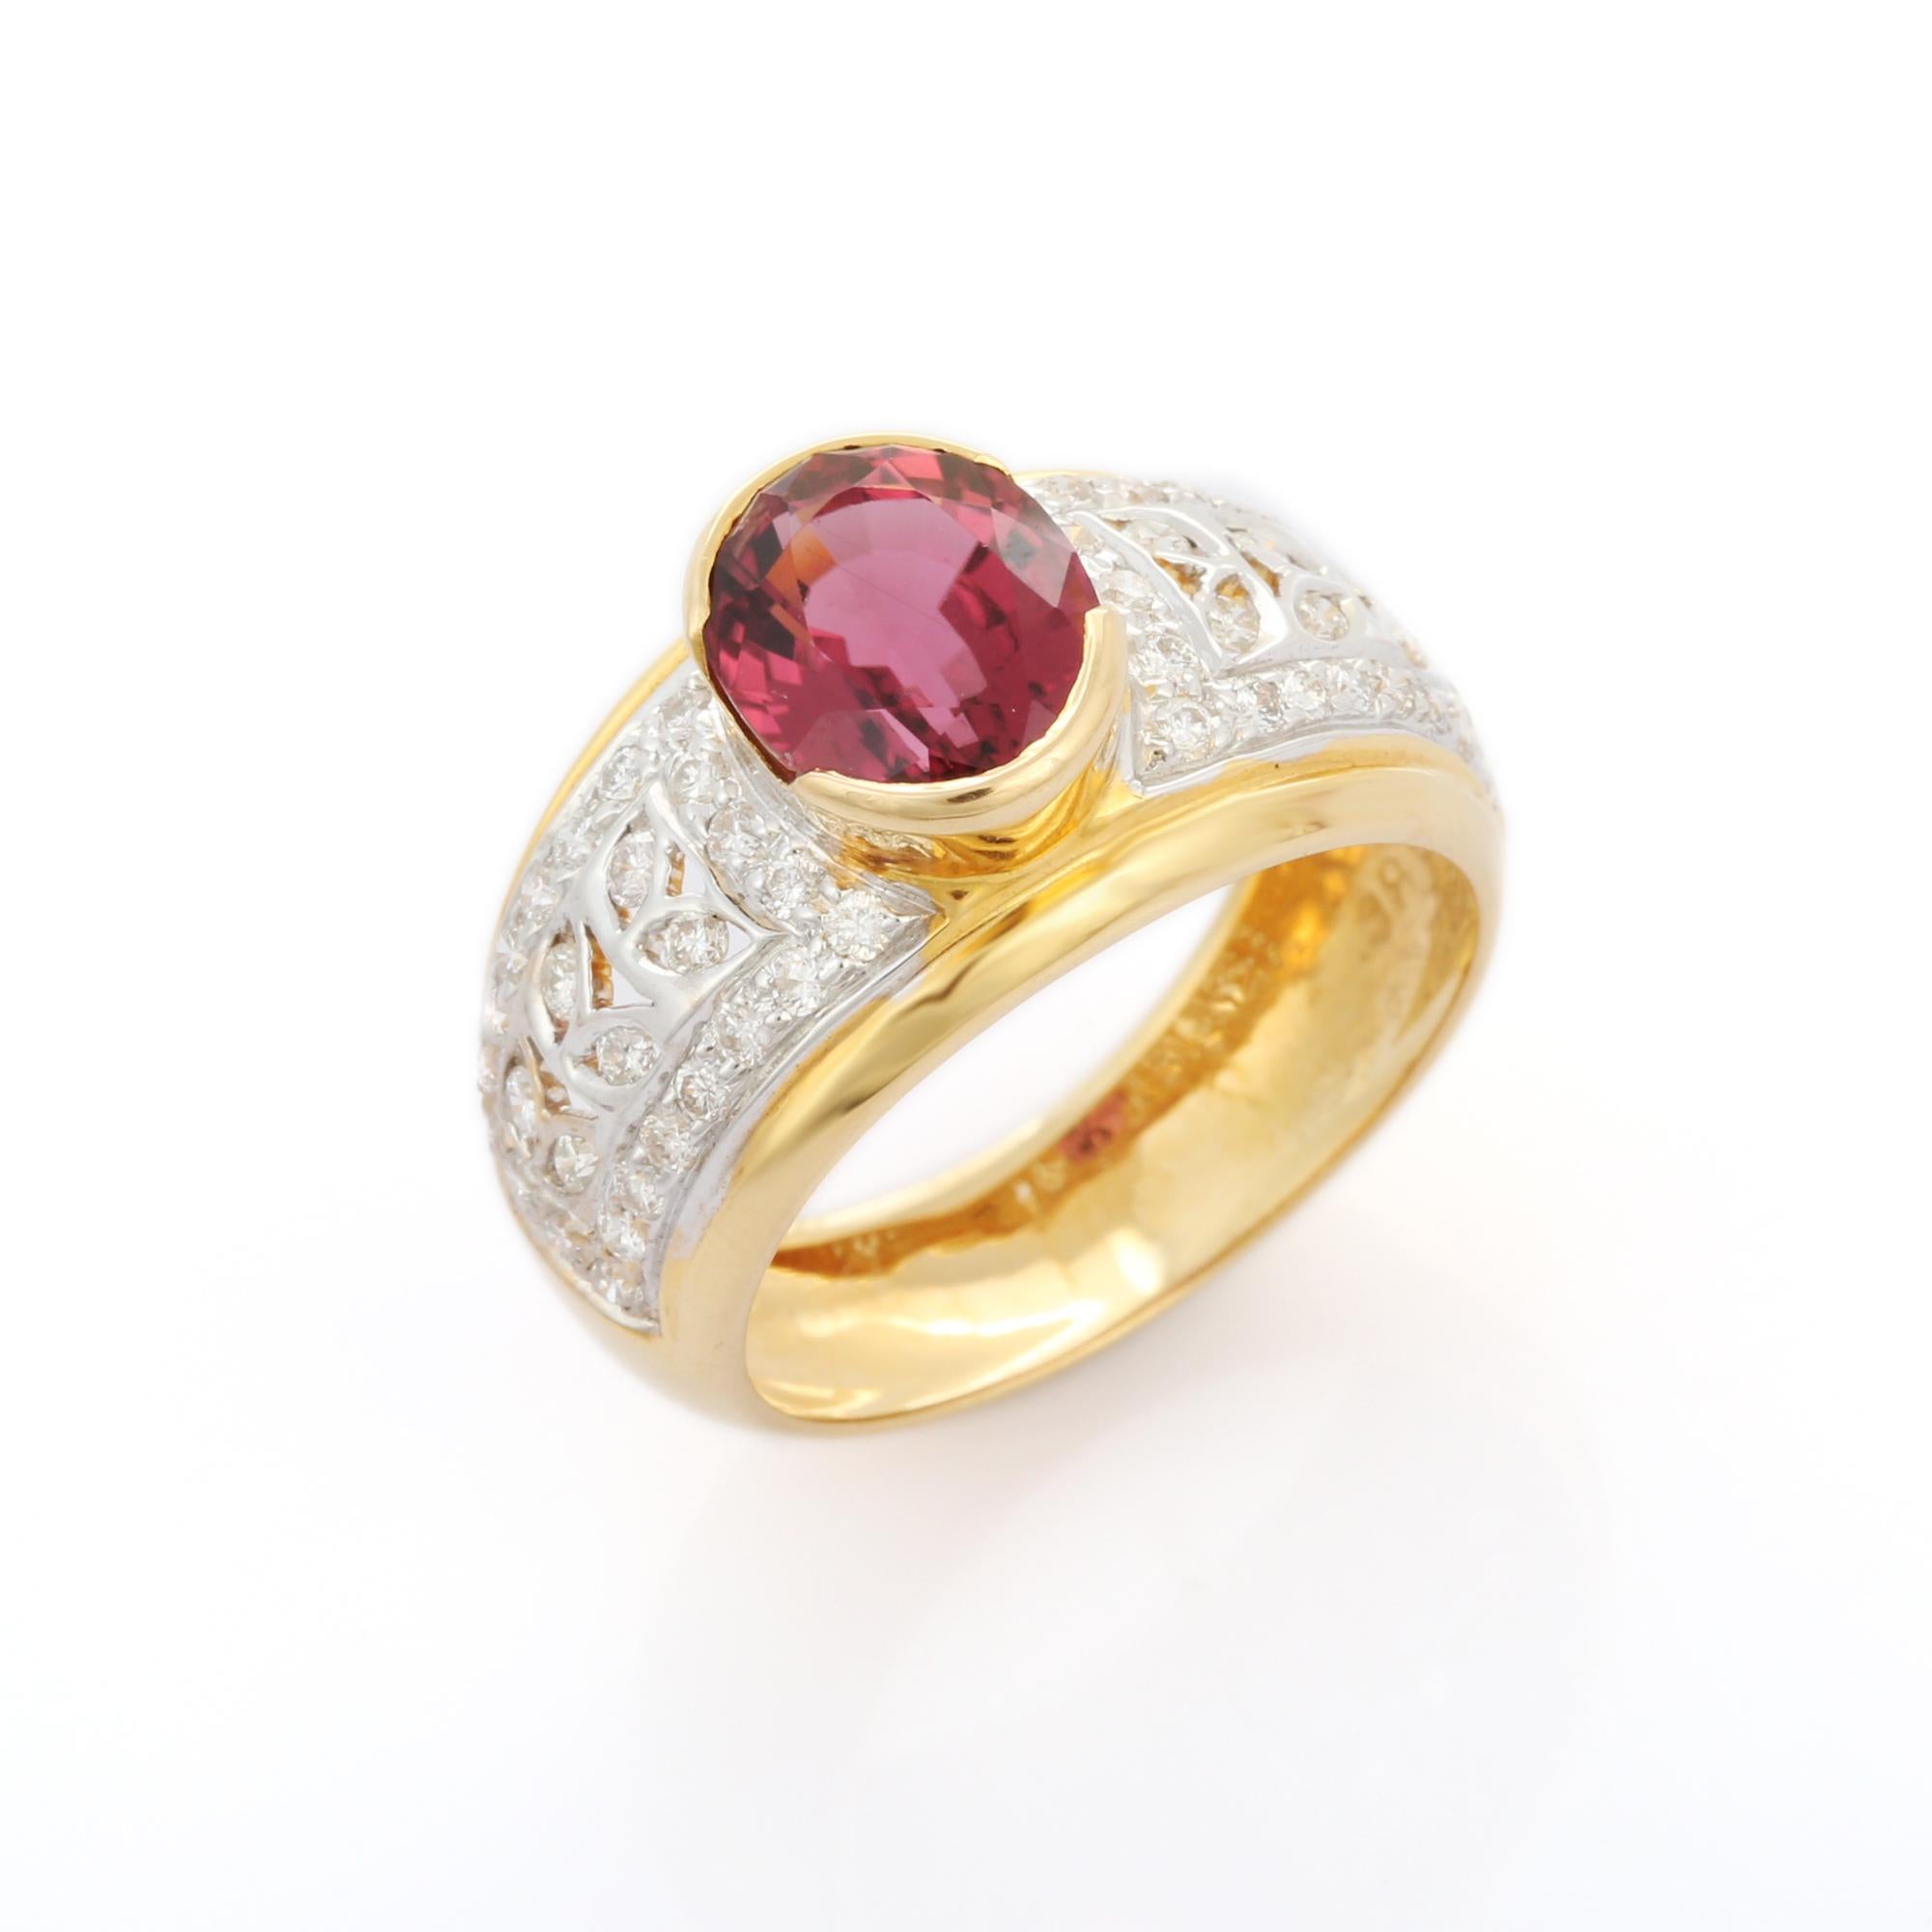 For Sale:  Vivid Oval Cut Ruby and Diamond Cocktail Ring in 18K Yellow Gold 8